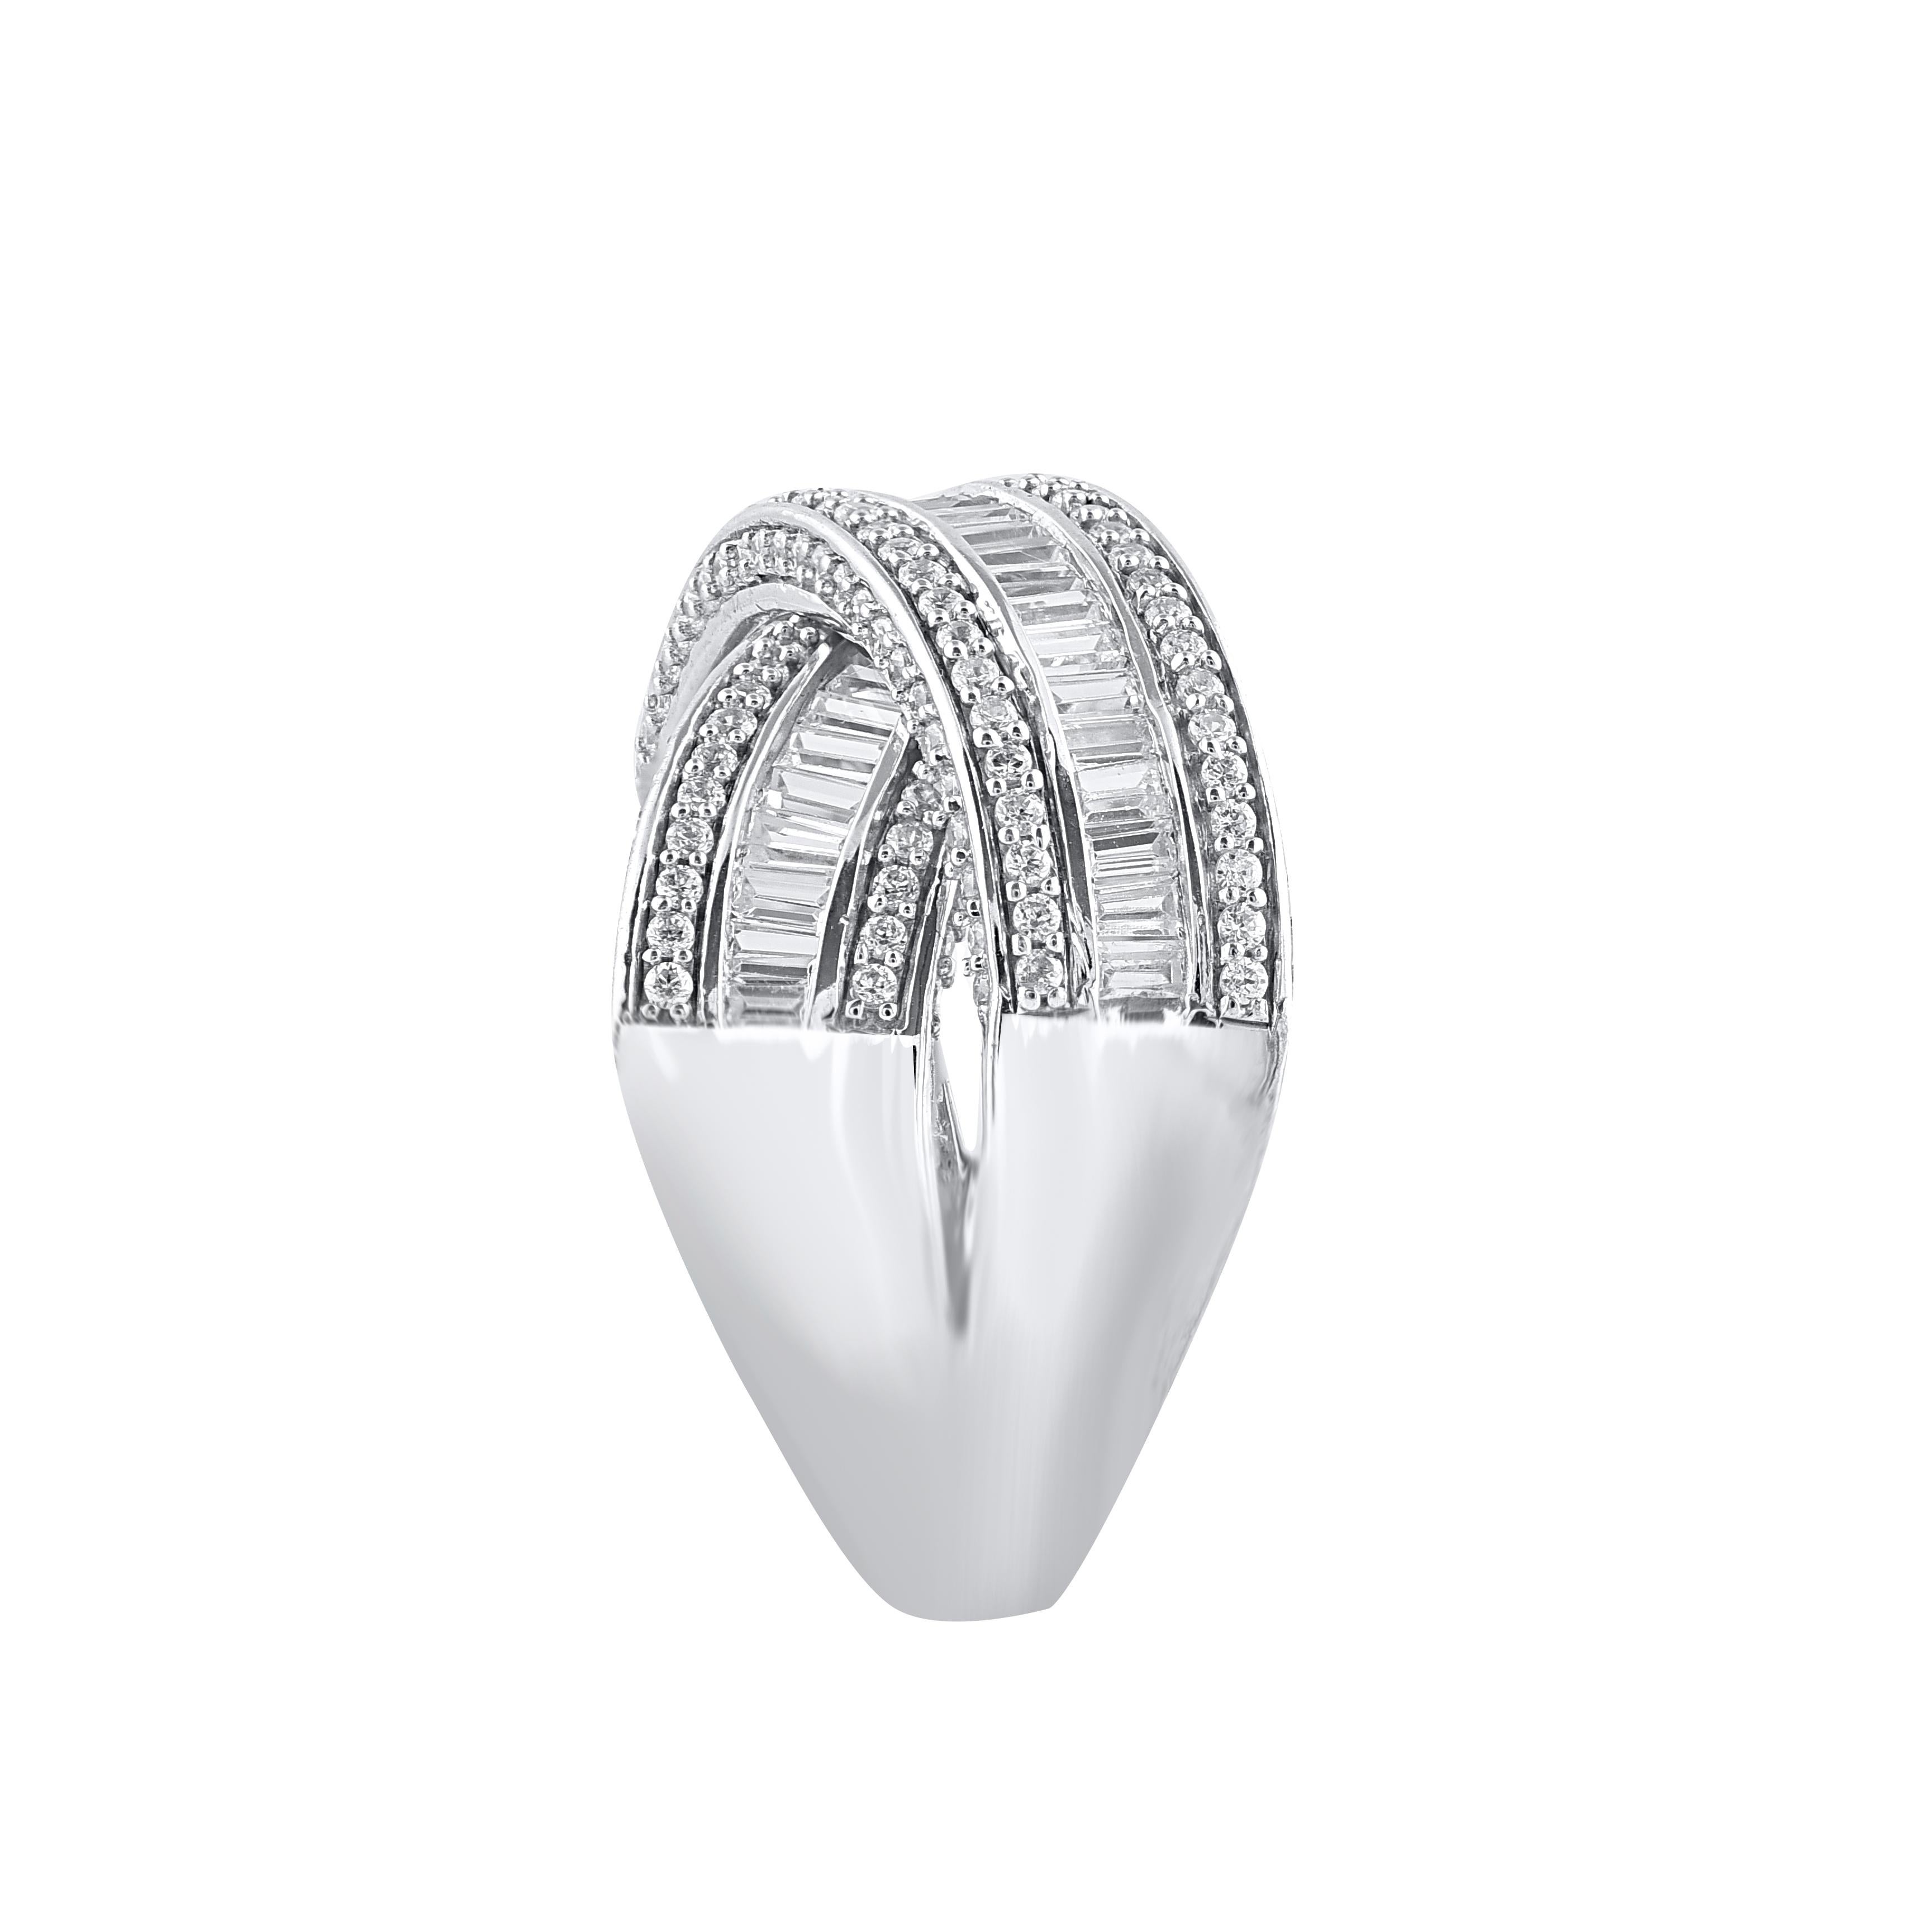 Beautiful Round Natural Diamond and crafted in 14 karat white gold criss-cross design Band Ring. This ring is beautifully designed and pave, prong and channel set with 178 round brilliant and 107 baguette-cut diamonds. The total weight of diamonds